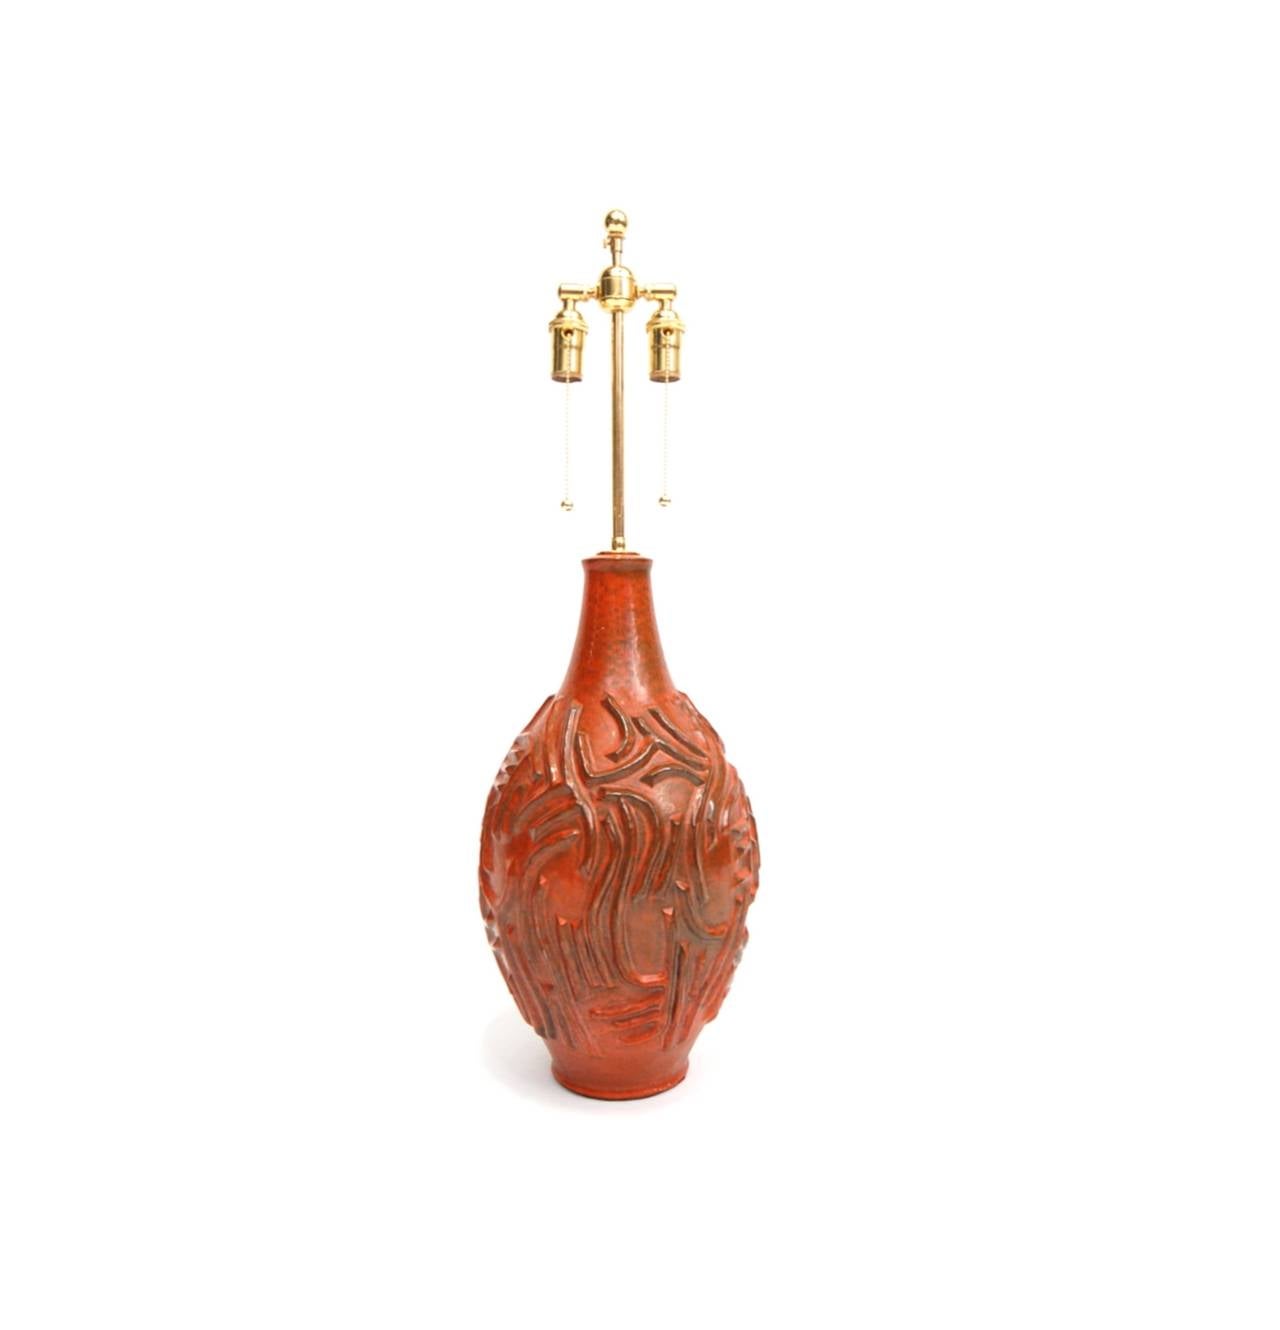 Large pottery lamp in orange/red mottled glaze, circa 1970. Newly rewired (as all of our lighting is) with rayon wrapped braided cord. Measures 32